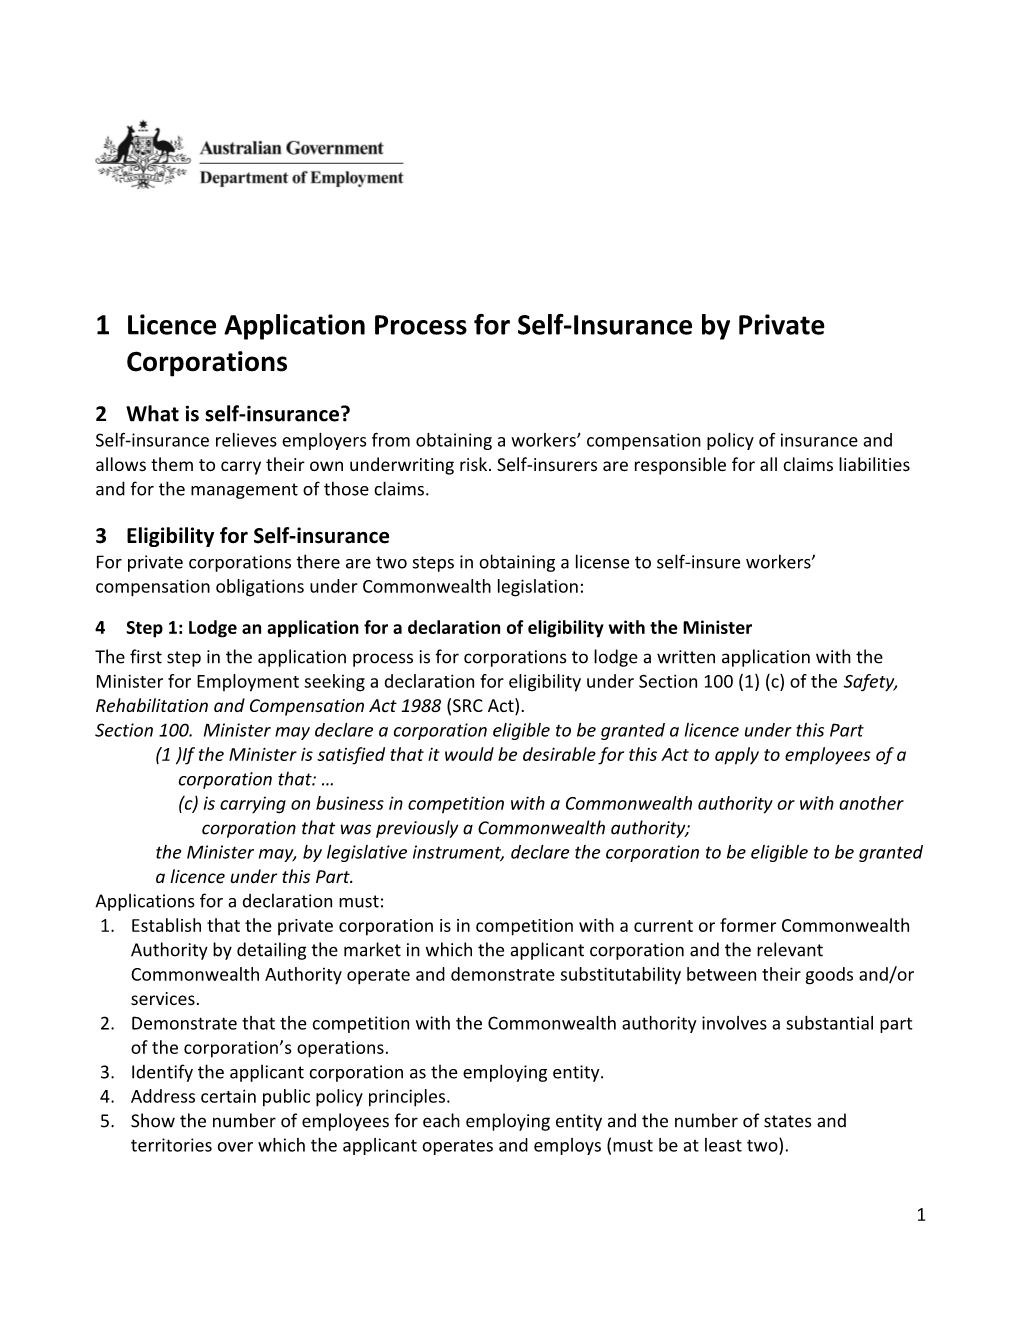 Licence Application Process for Self-Insurance by Private Corporations